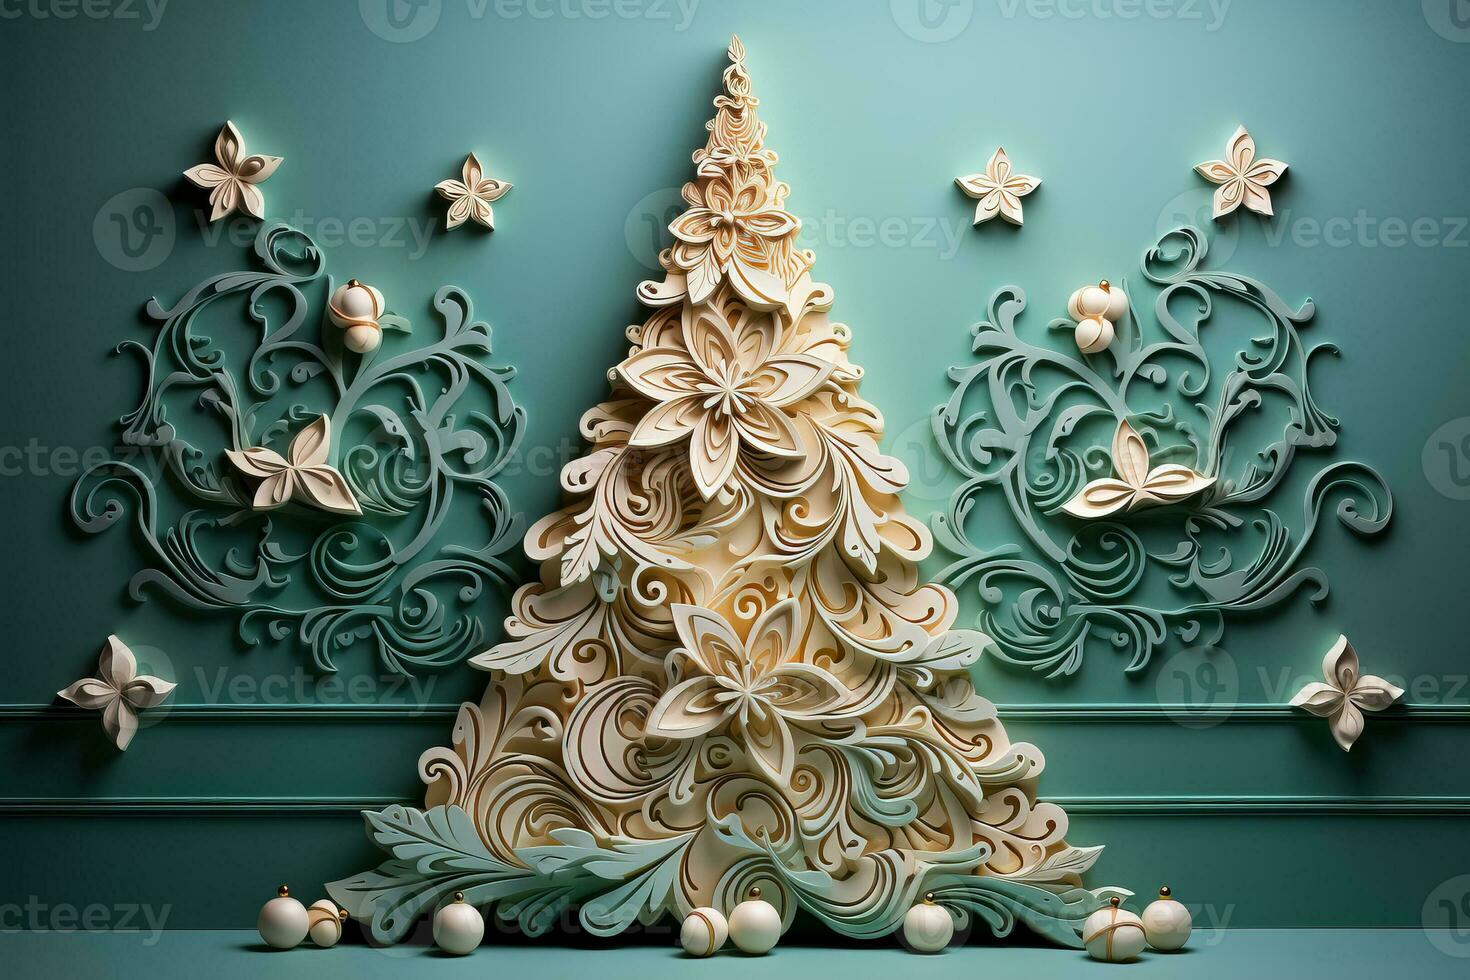 A close-up of a beautifully decorated Christmas tree low relief against a mint green backdrop exuding festive cheer photo